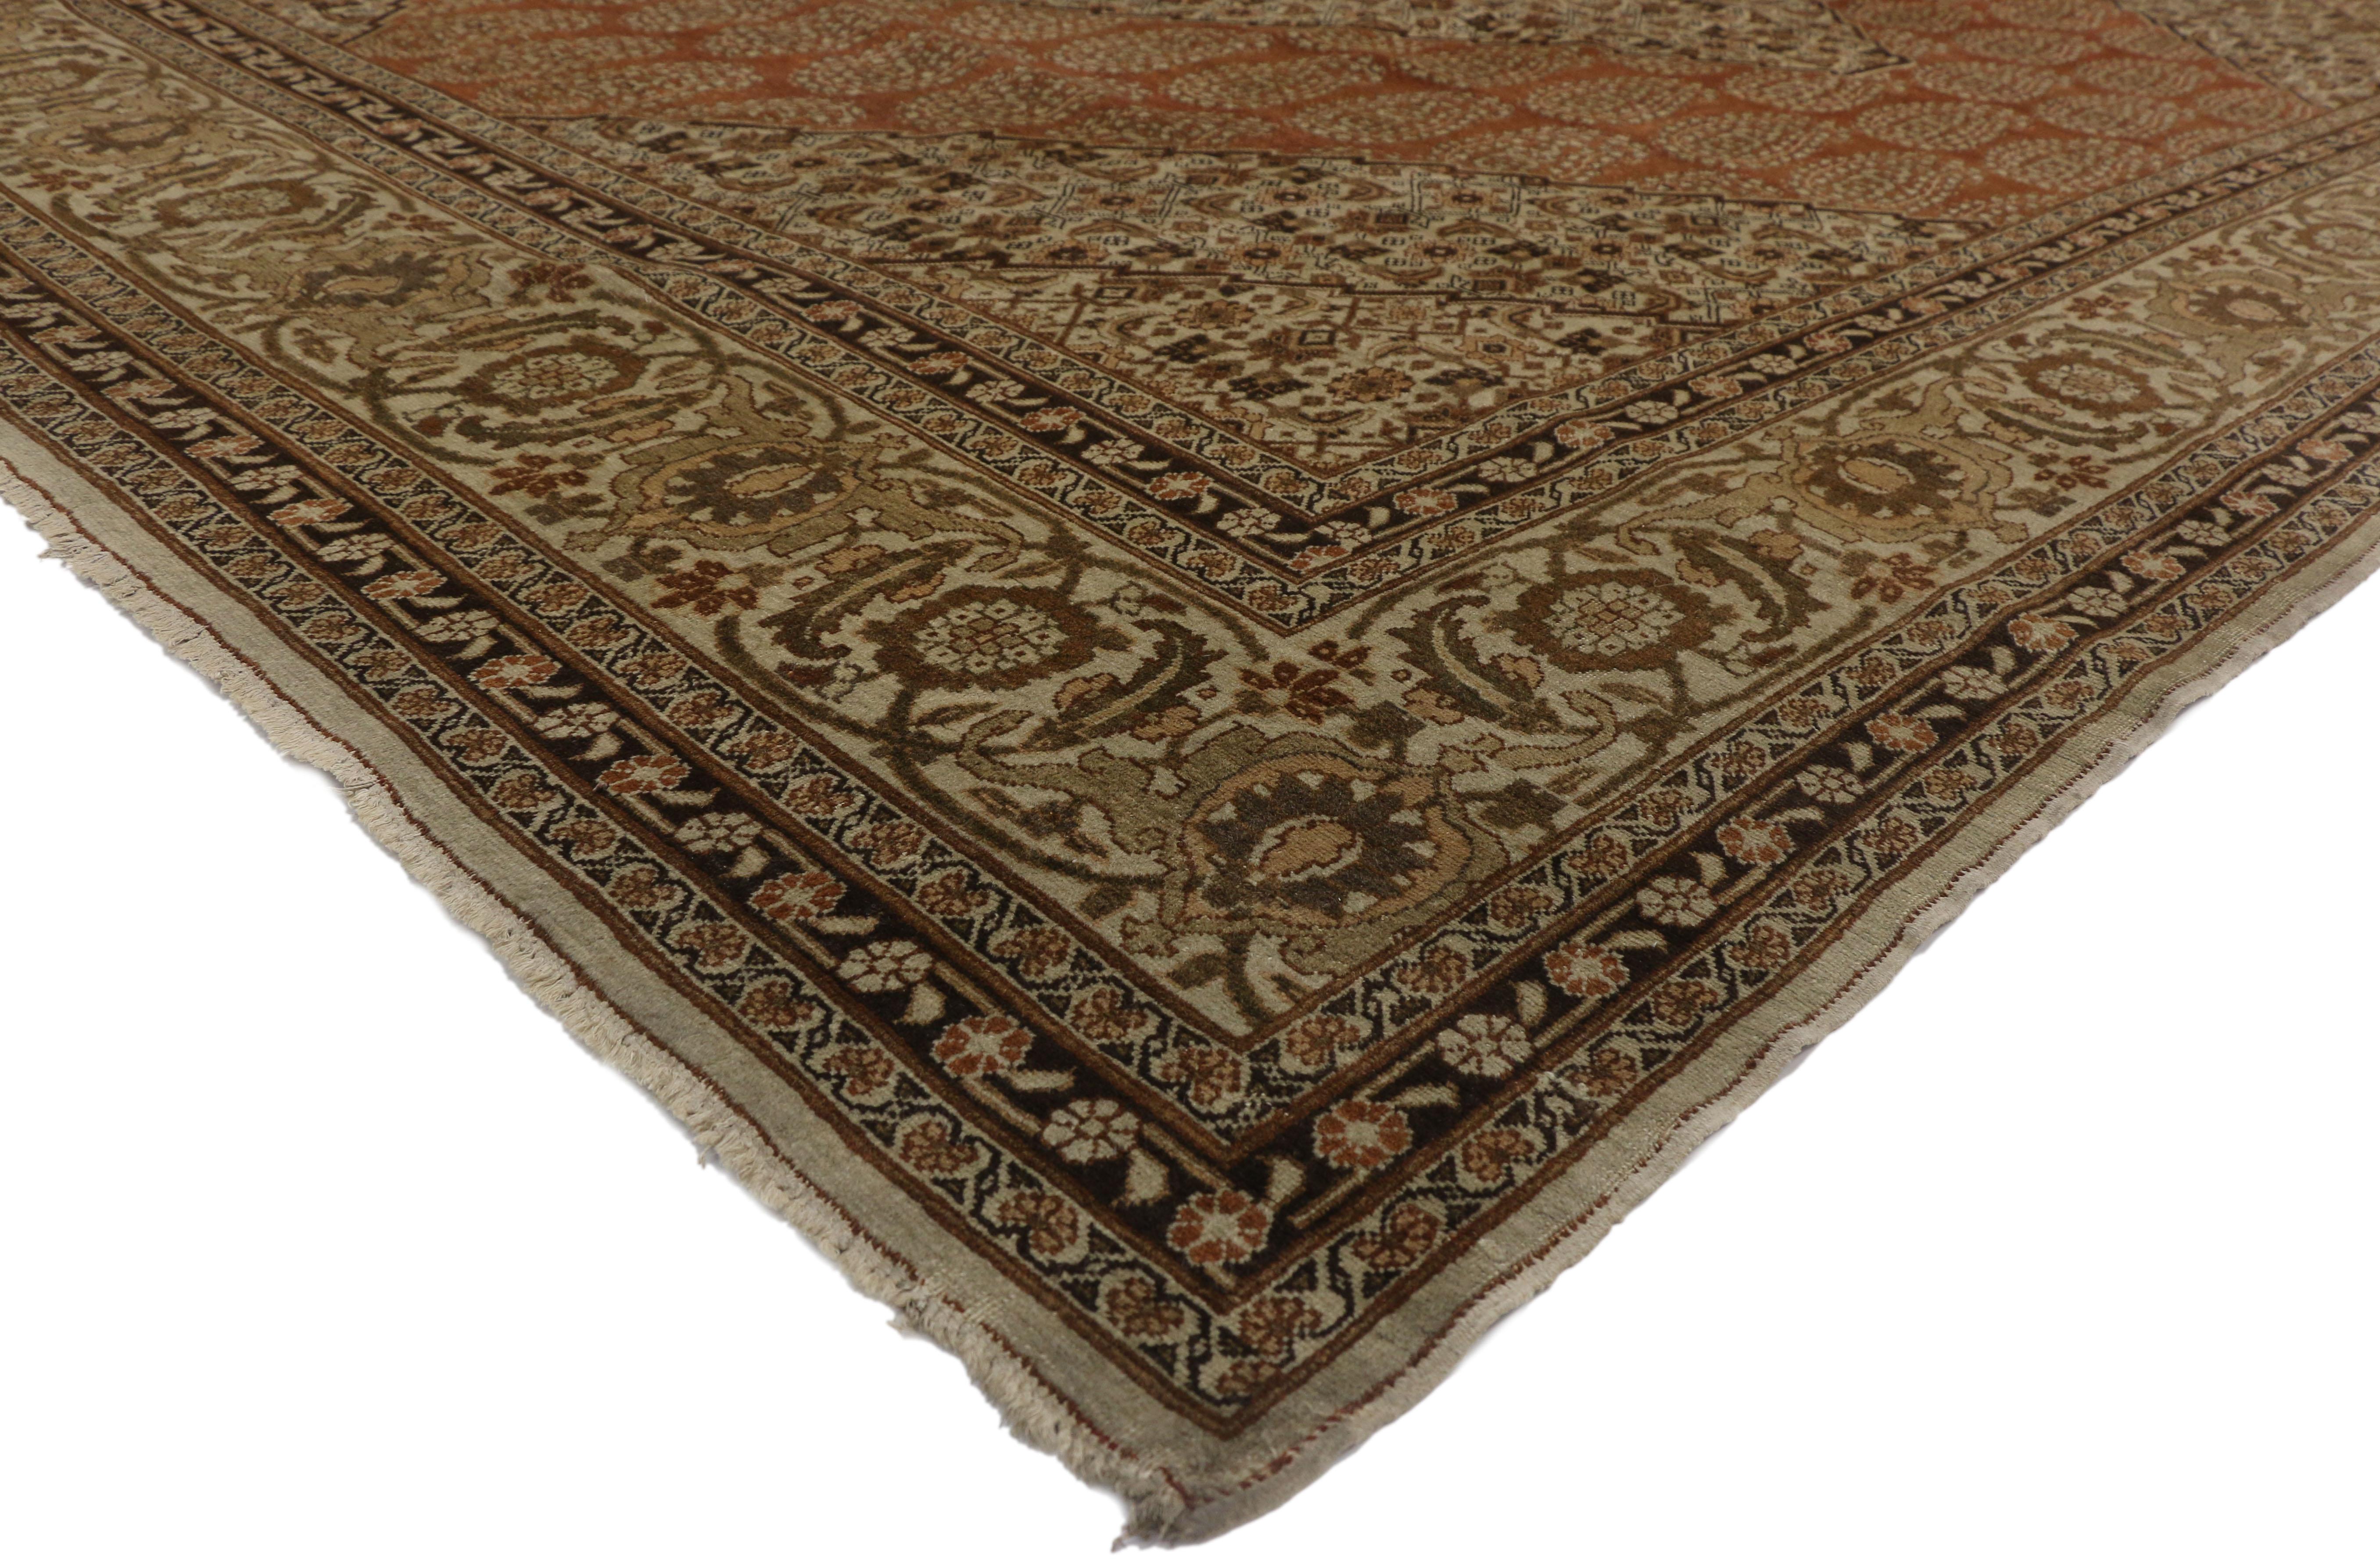 73538, Haji Khalili antique Persian Tabriz rug with Modern Rustic style. This hand knotted wool Haji Khalili antique Persian Tabriz rug features a large stepped concentric hexagonal medallion filled Herati motifs. It is surrounded by a burnt